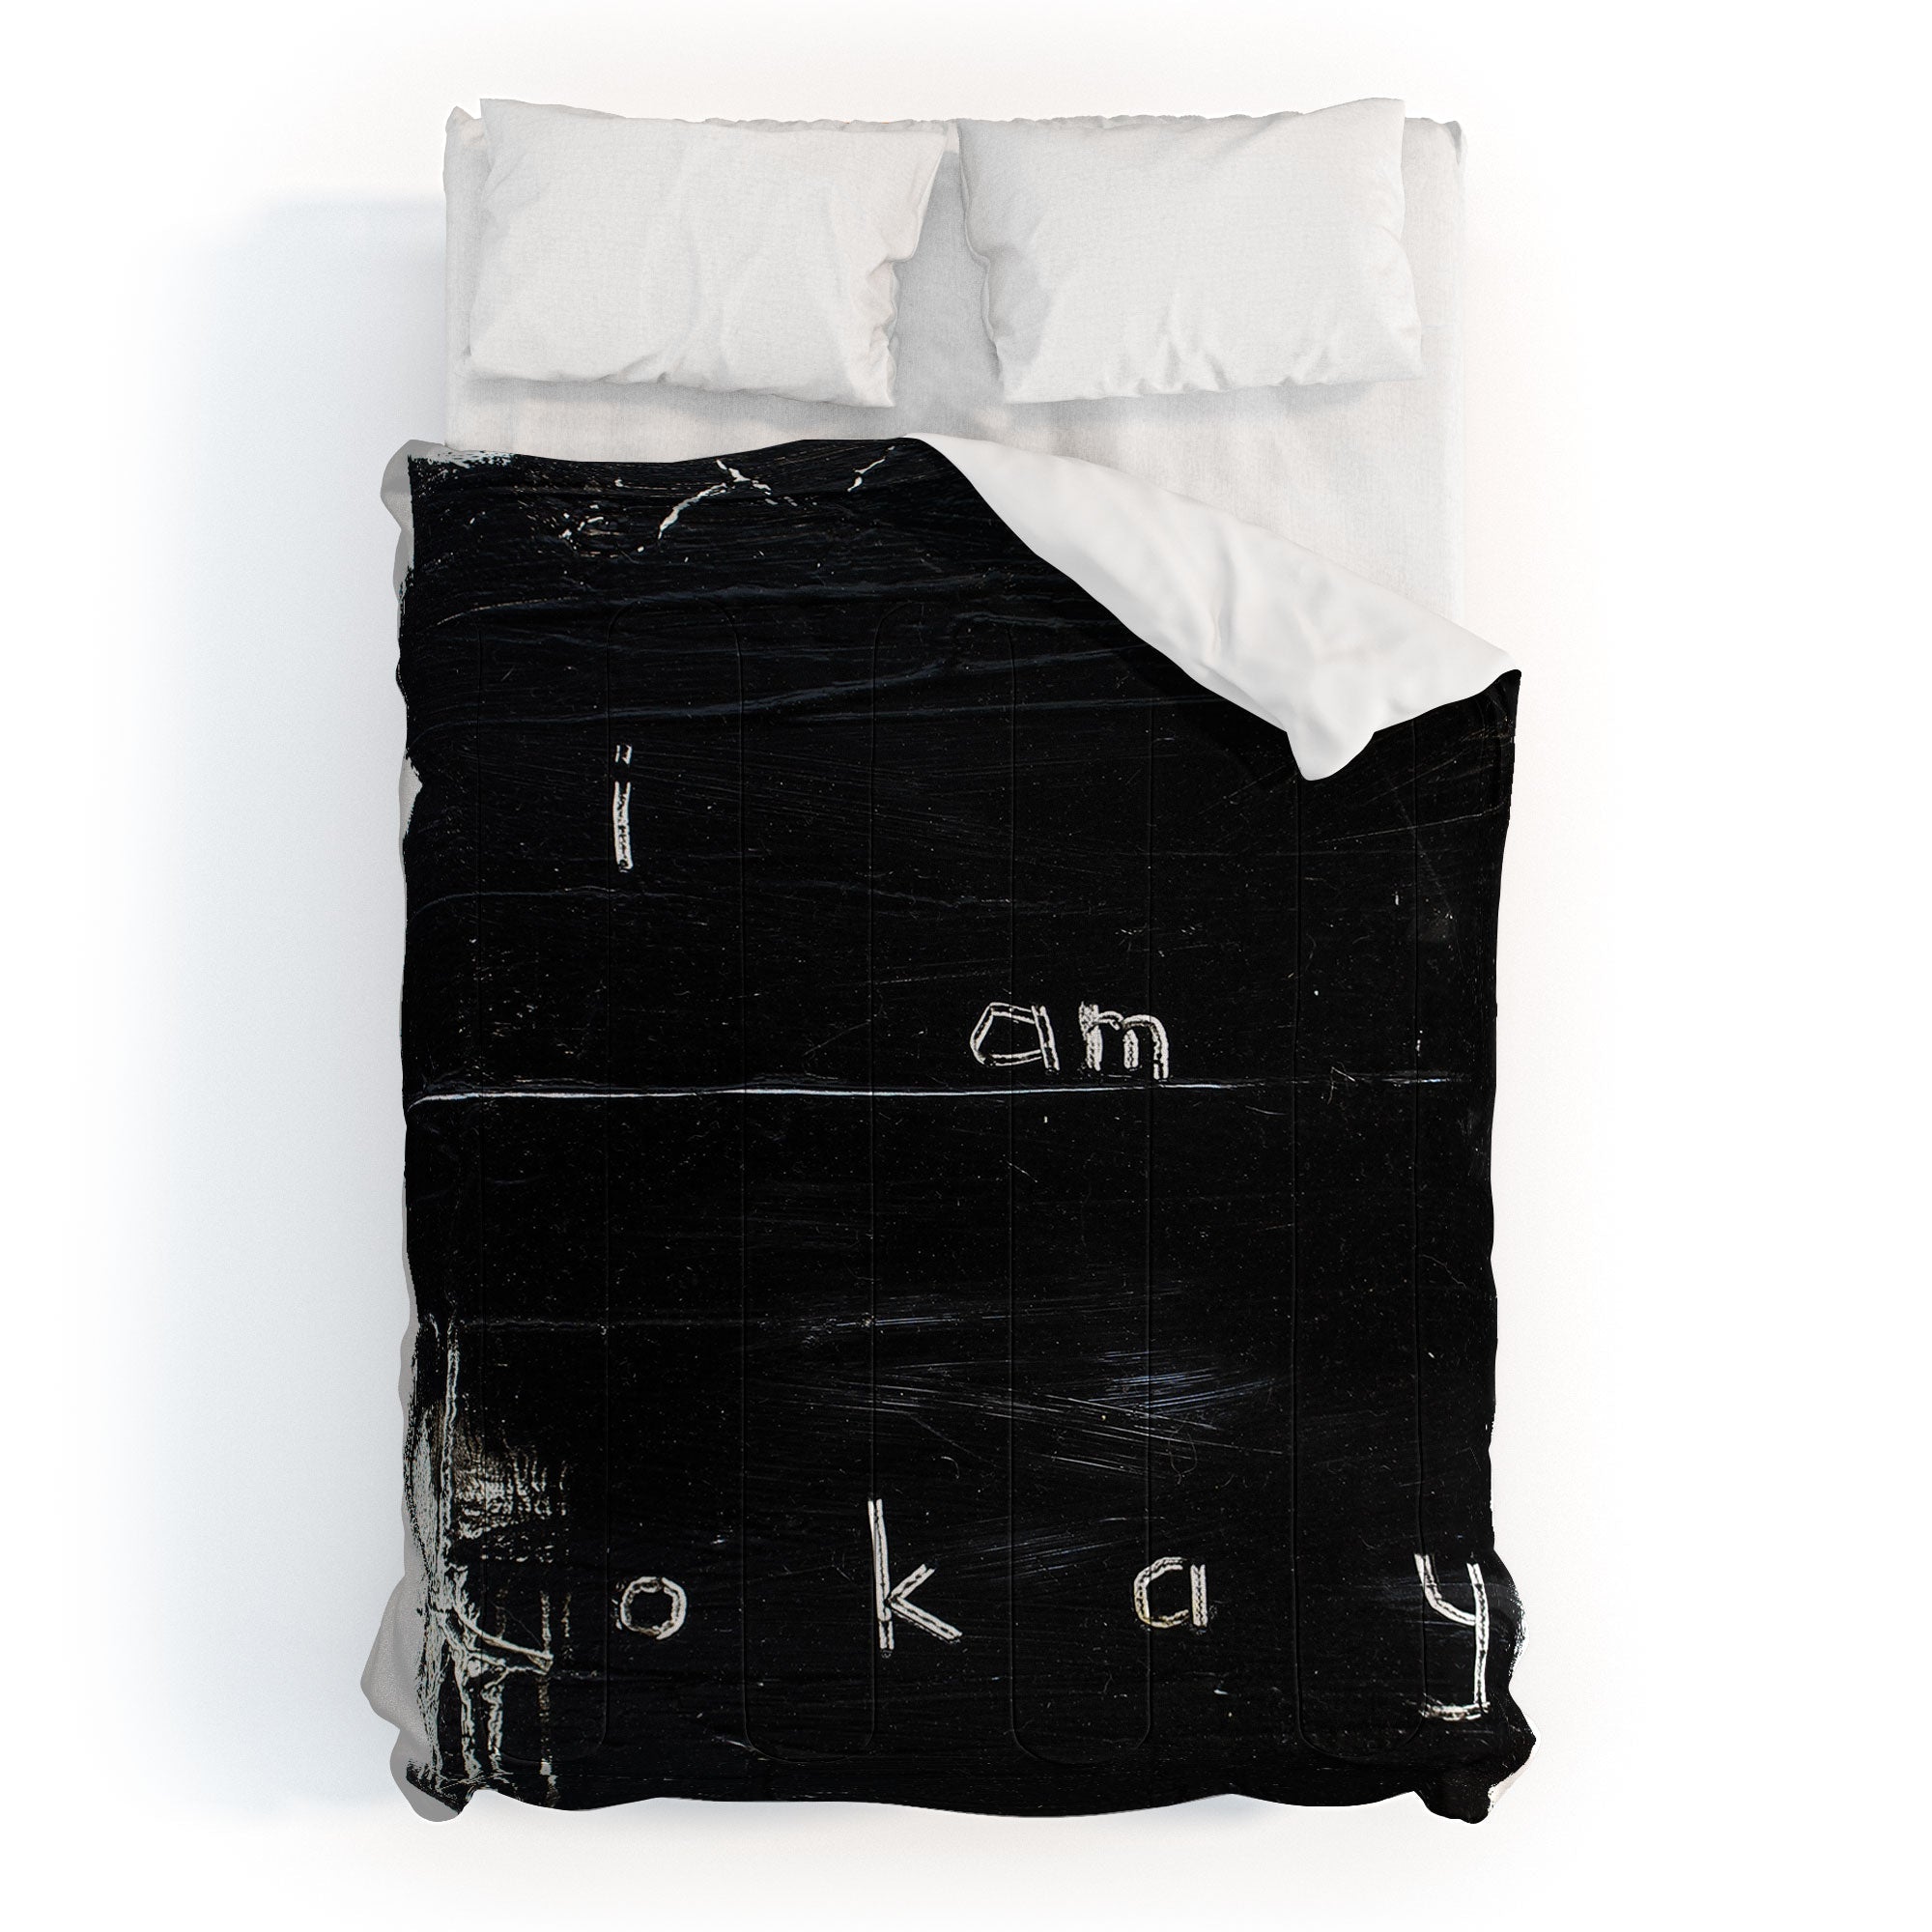 "i am okay" comforter + bed in a bag